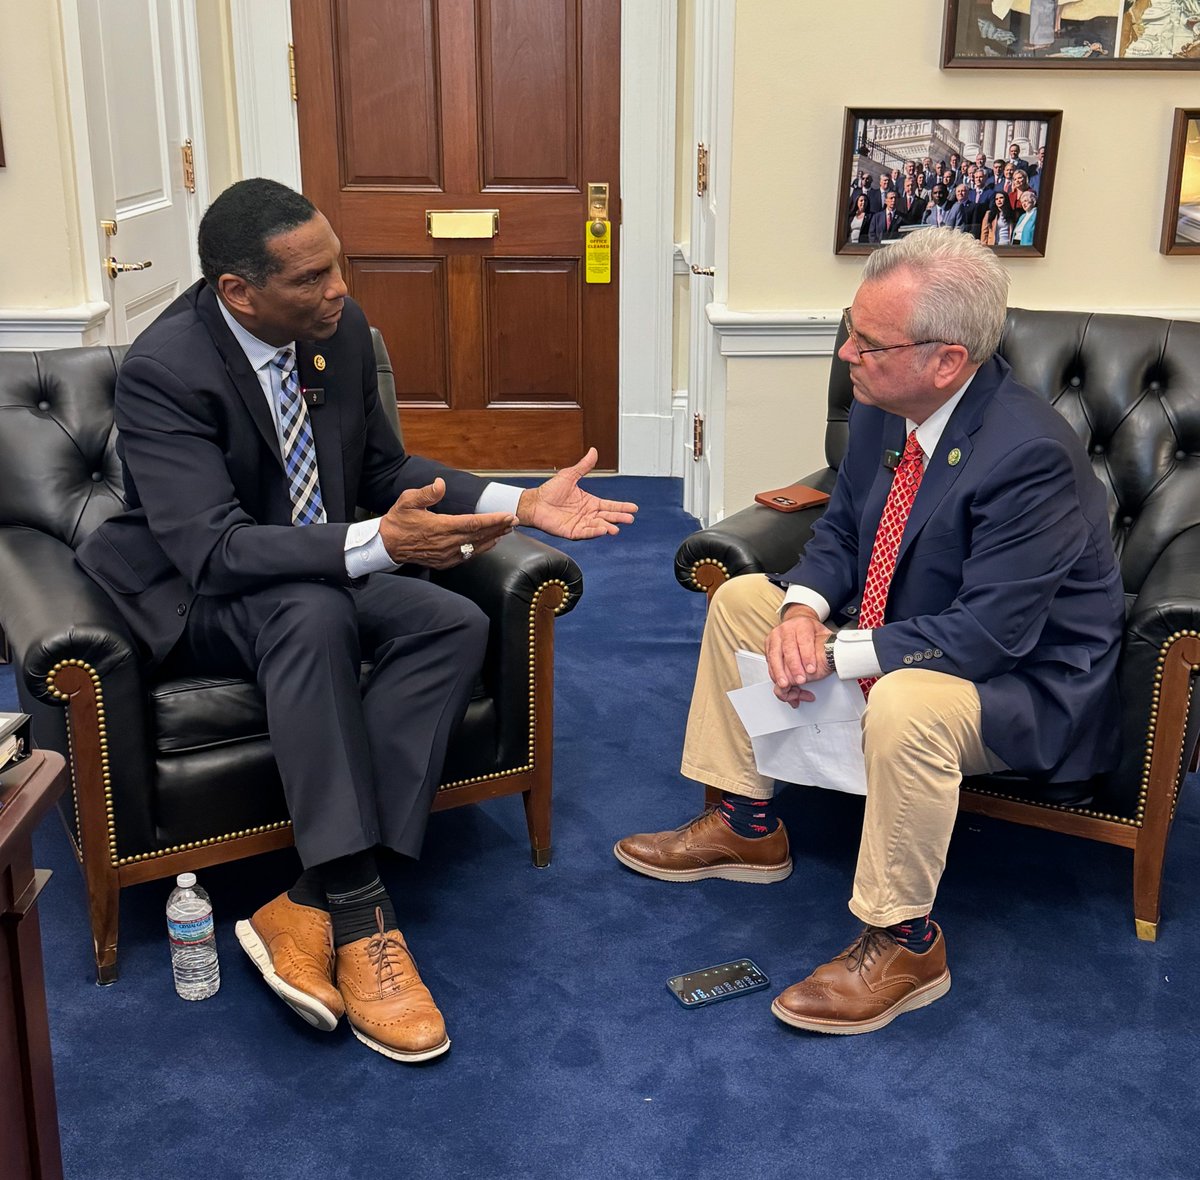 Stay tuned! My conversation with my friend @repmarkalford on football, history, and @HouseGOP’s positive vision for America’s future will be out on his radio soon.